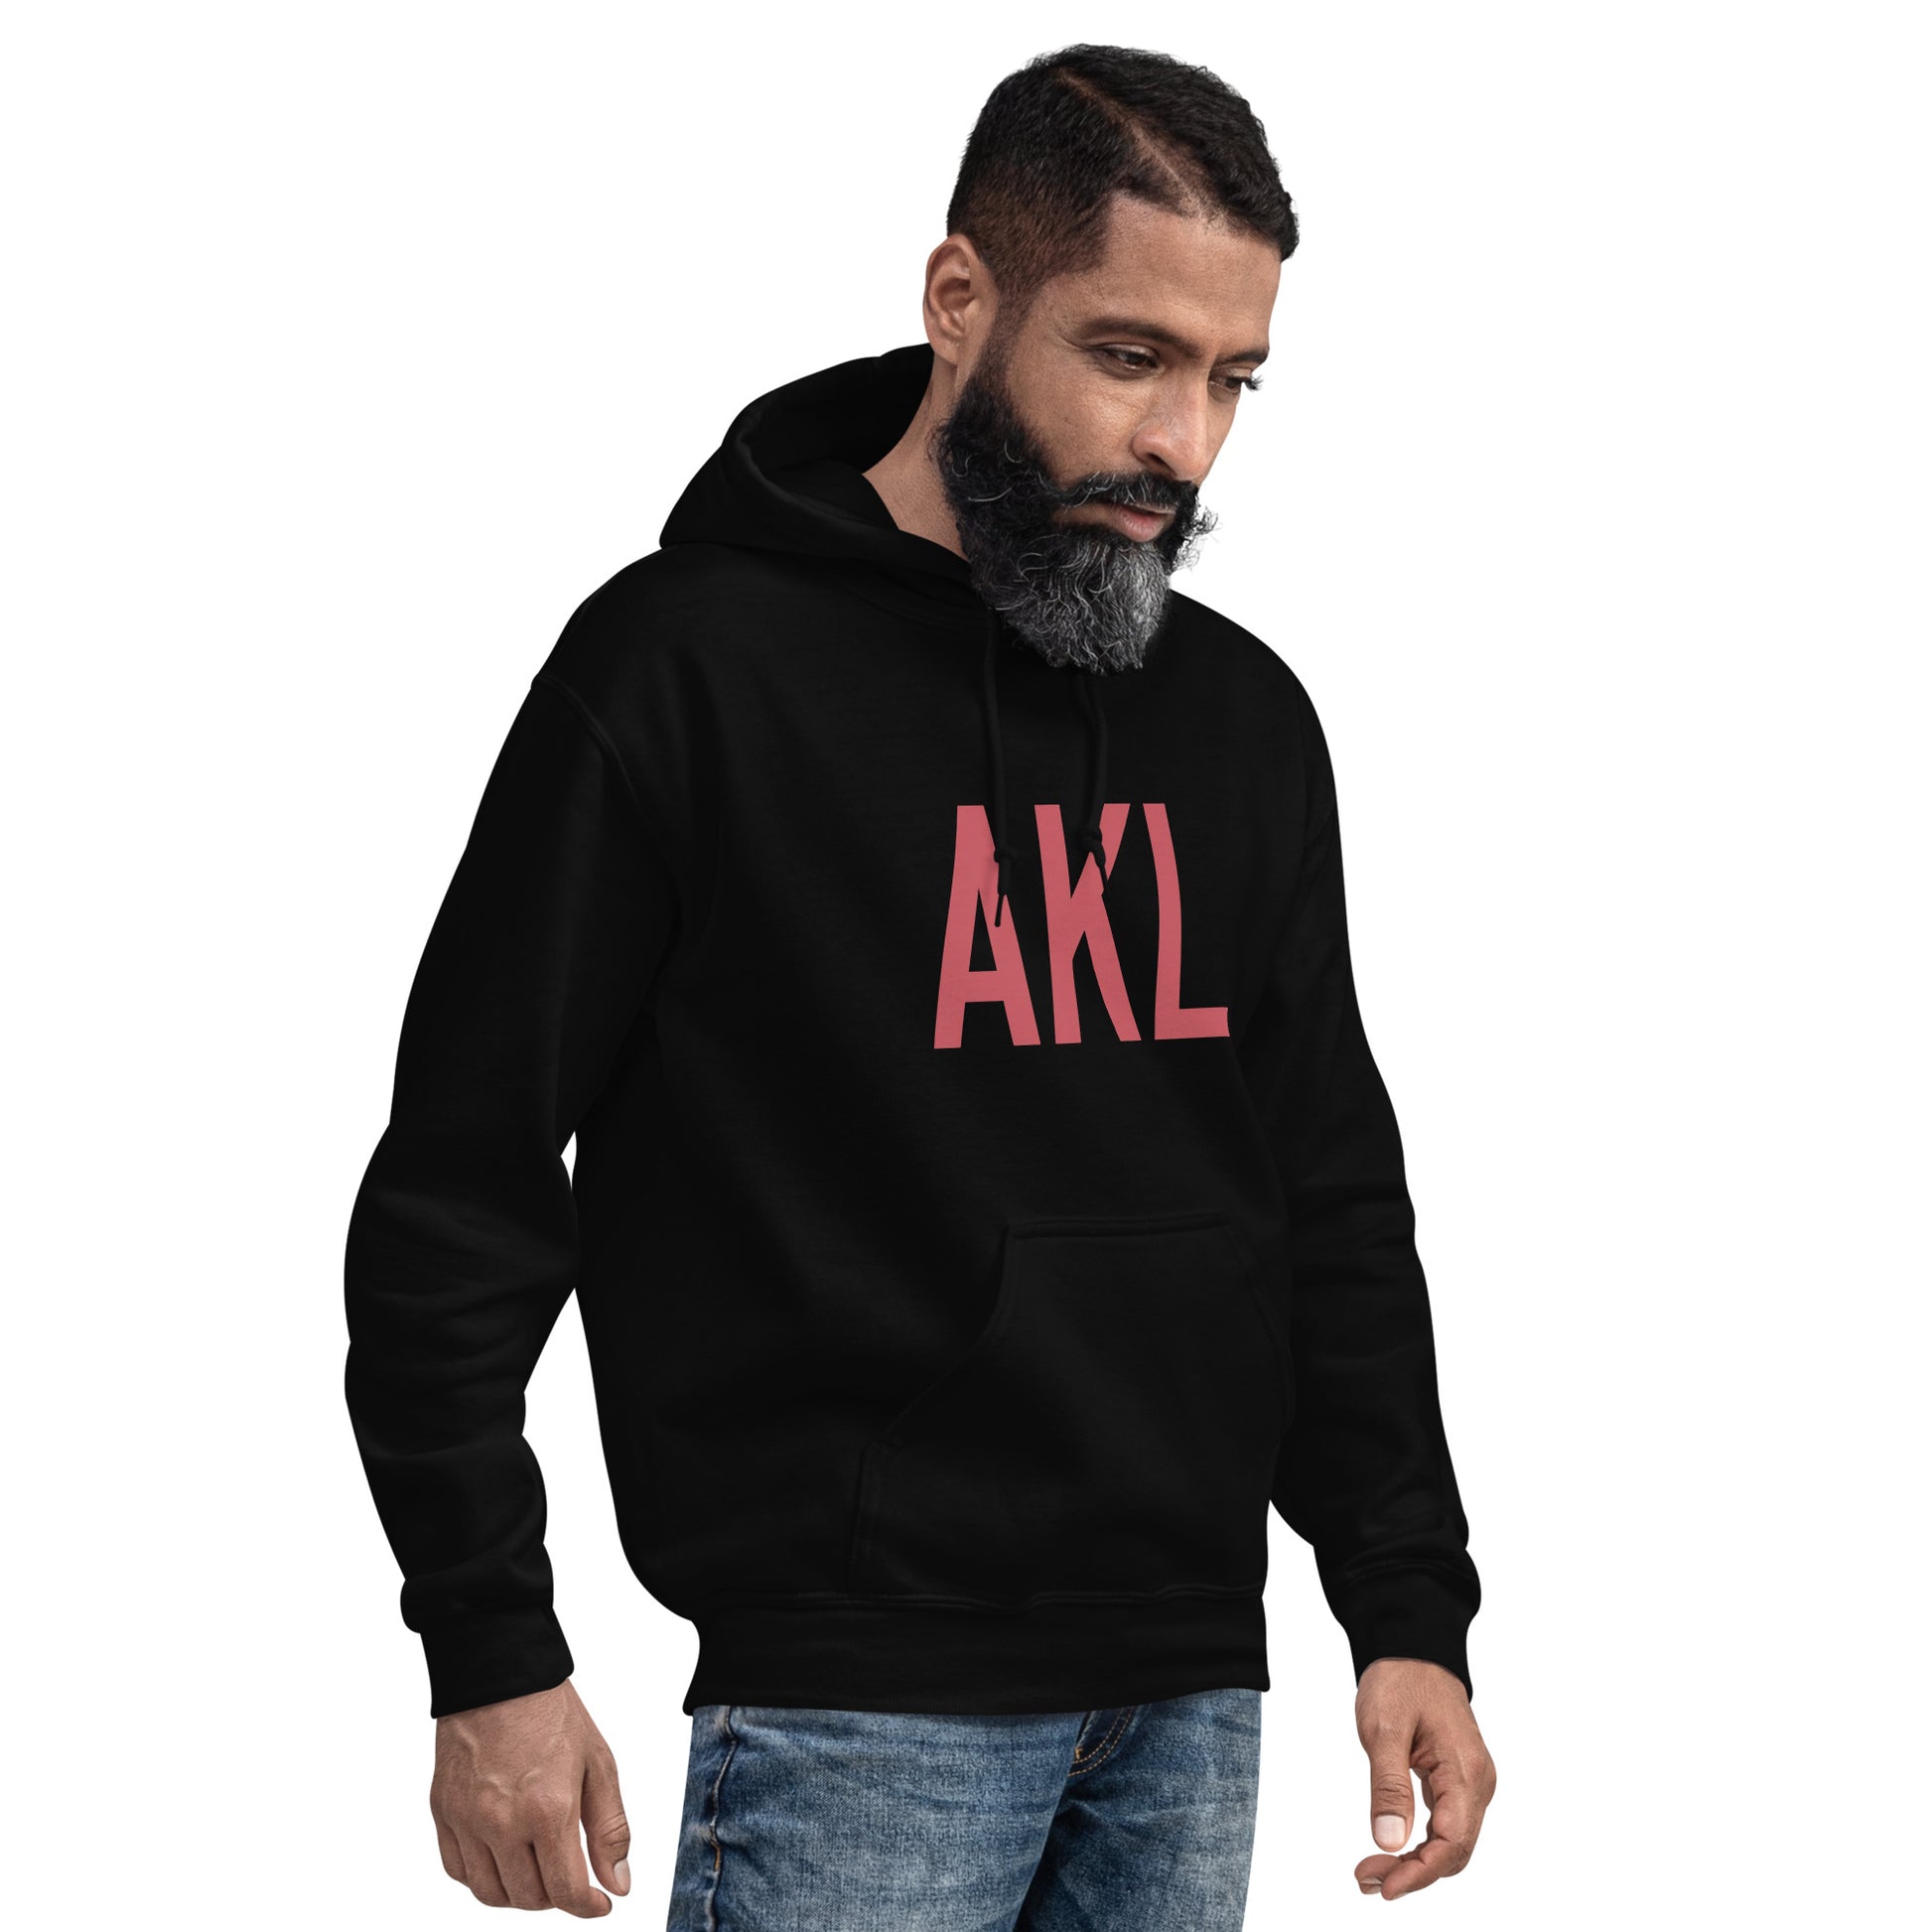 Aviation Enthusiast Hoodie - Deep Pink Graphic • AKL Auckland • YHM Designs - Image 06